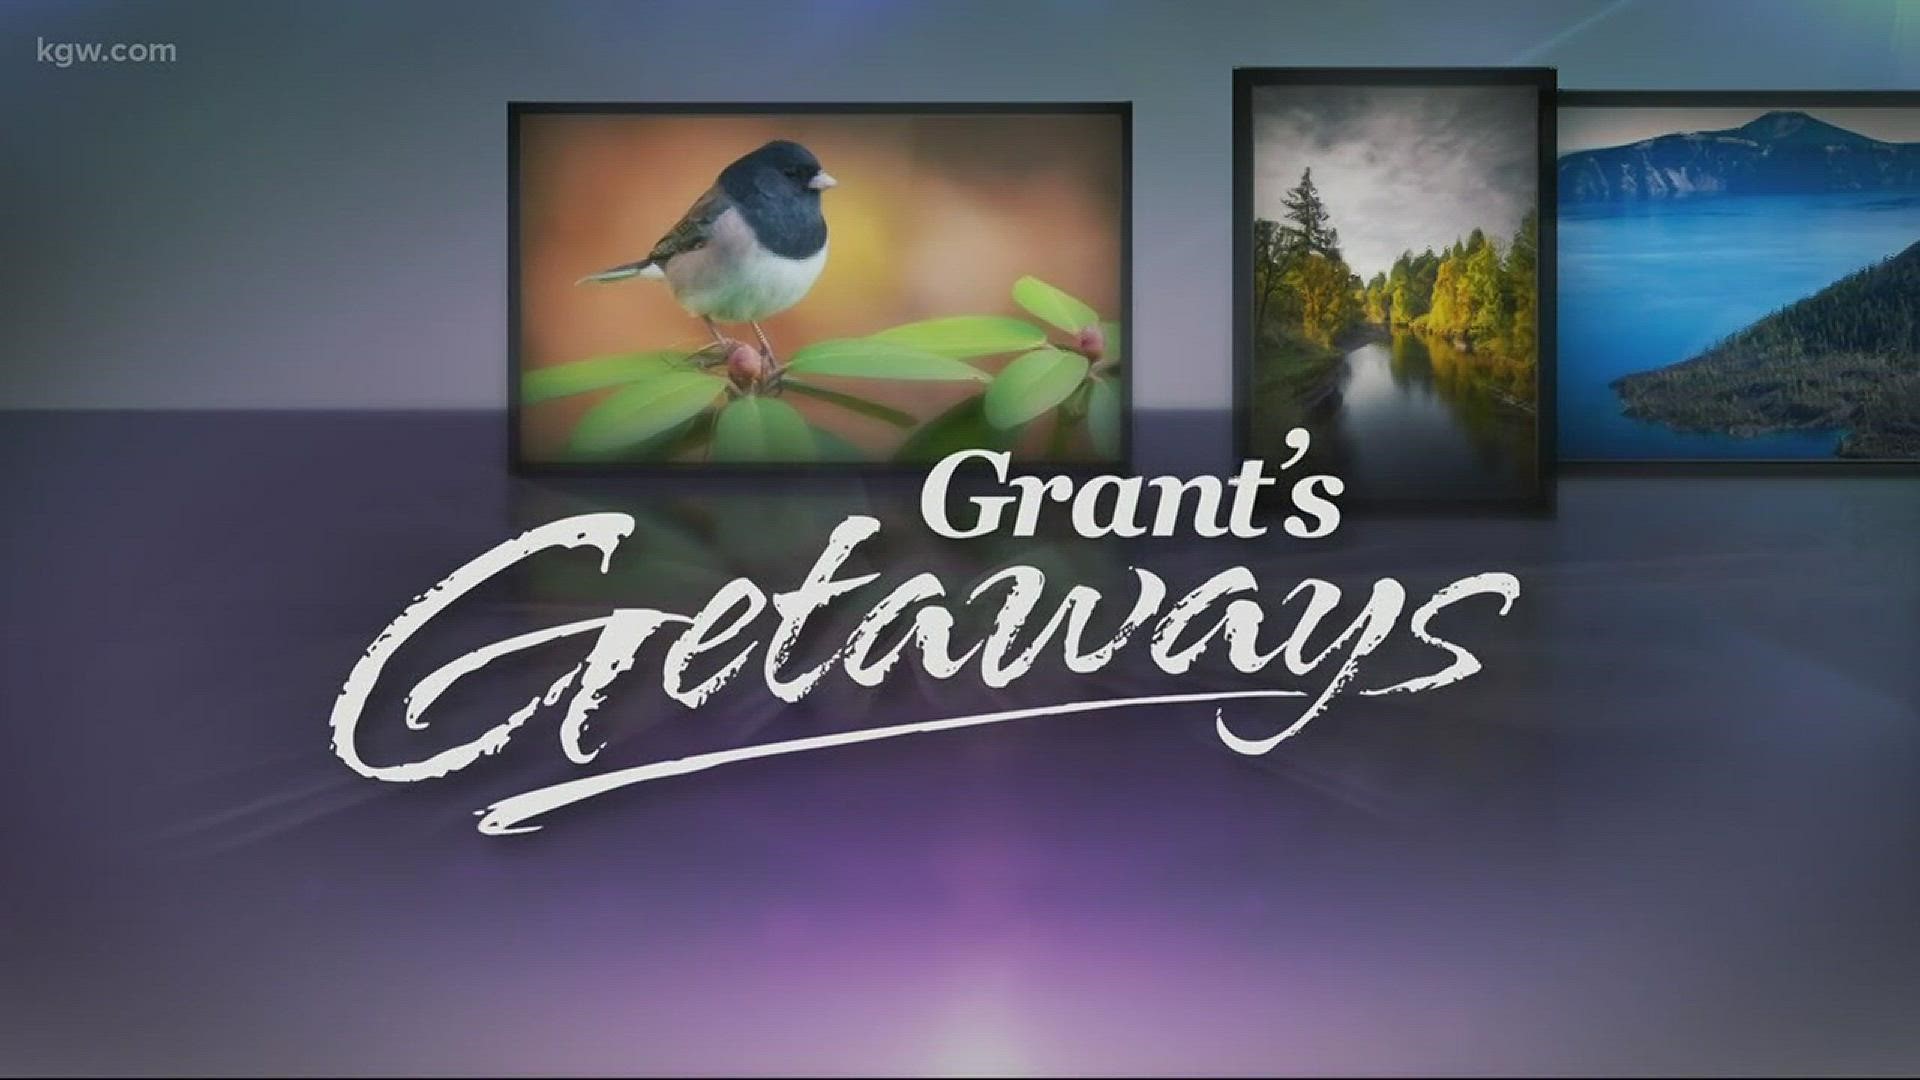 Grant's Getaways. Join Grant McComie for an Eastern Oregon Excursion Railroad getaway.